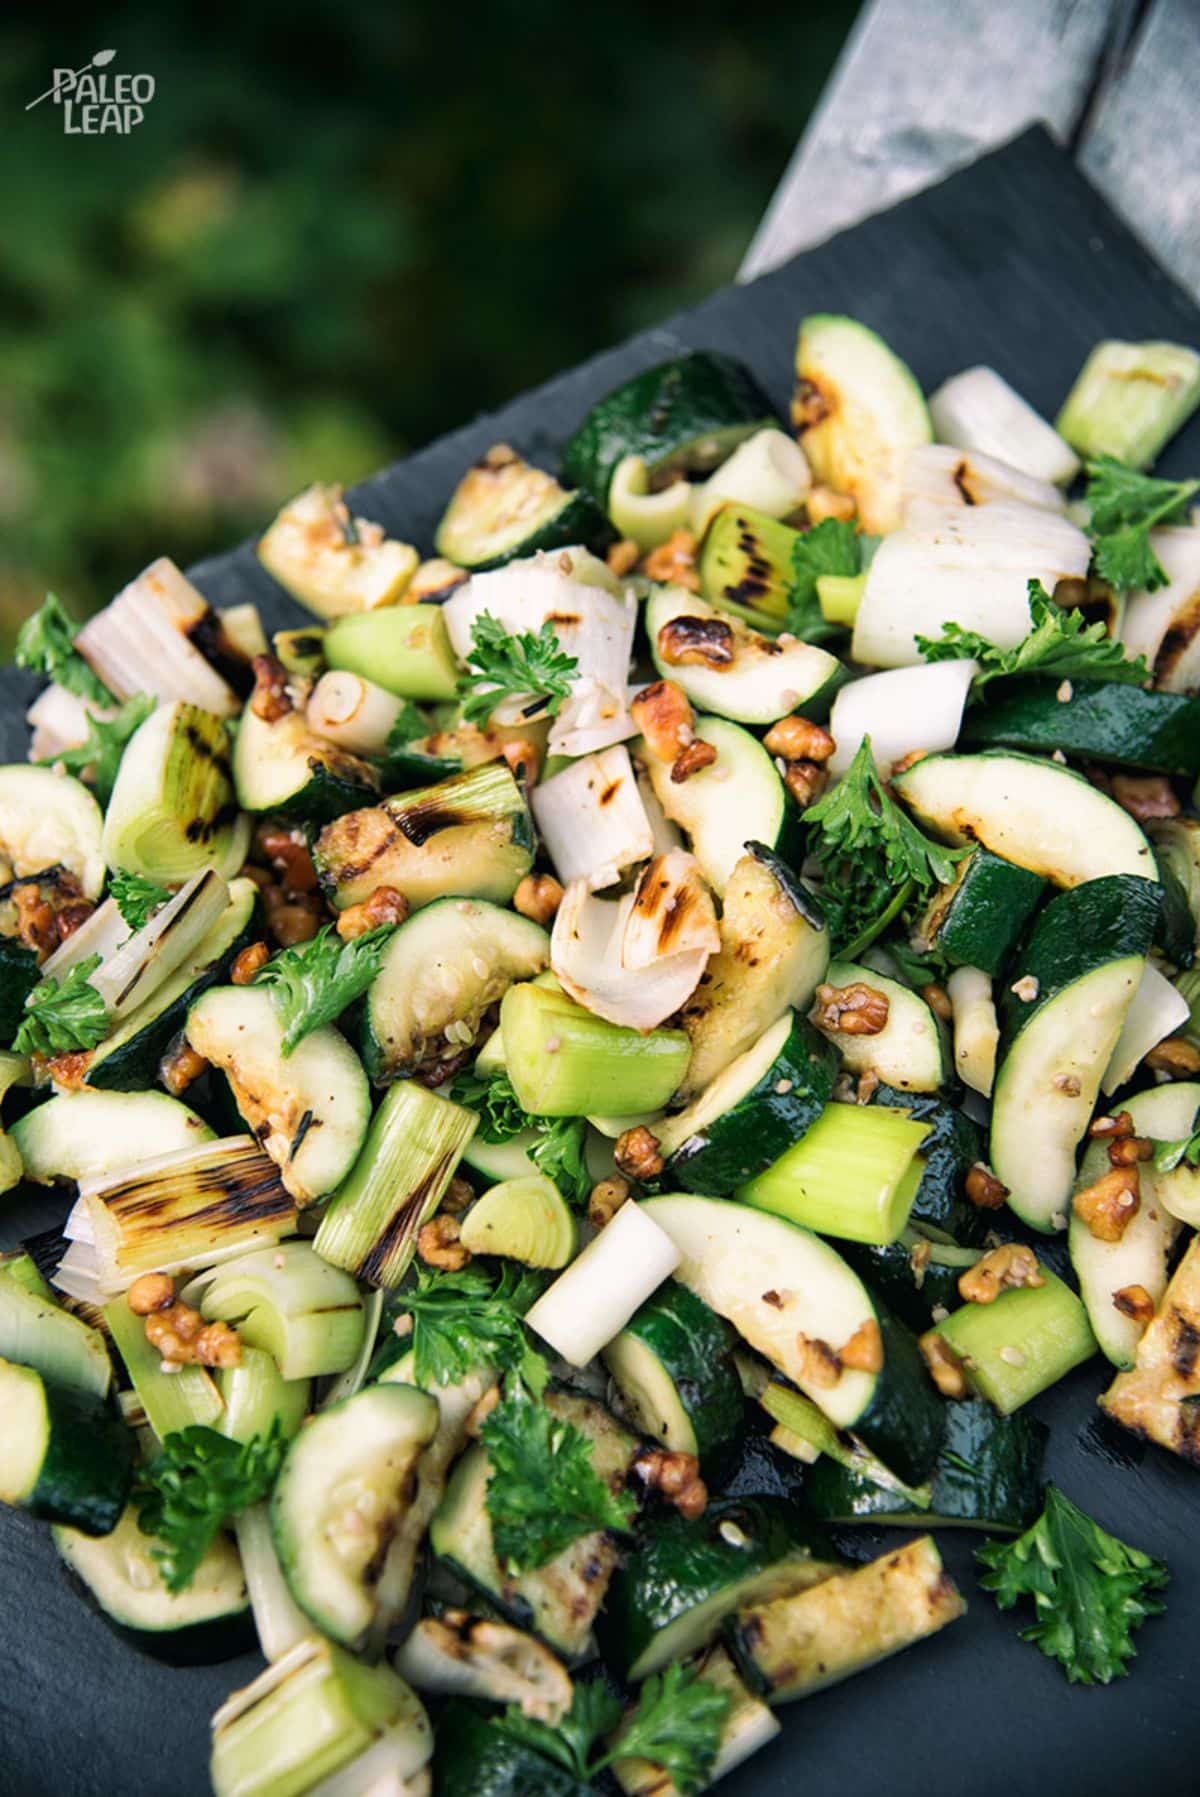 Grilled Zucchini And Leeks With Herb Dressing